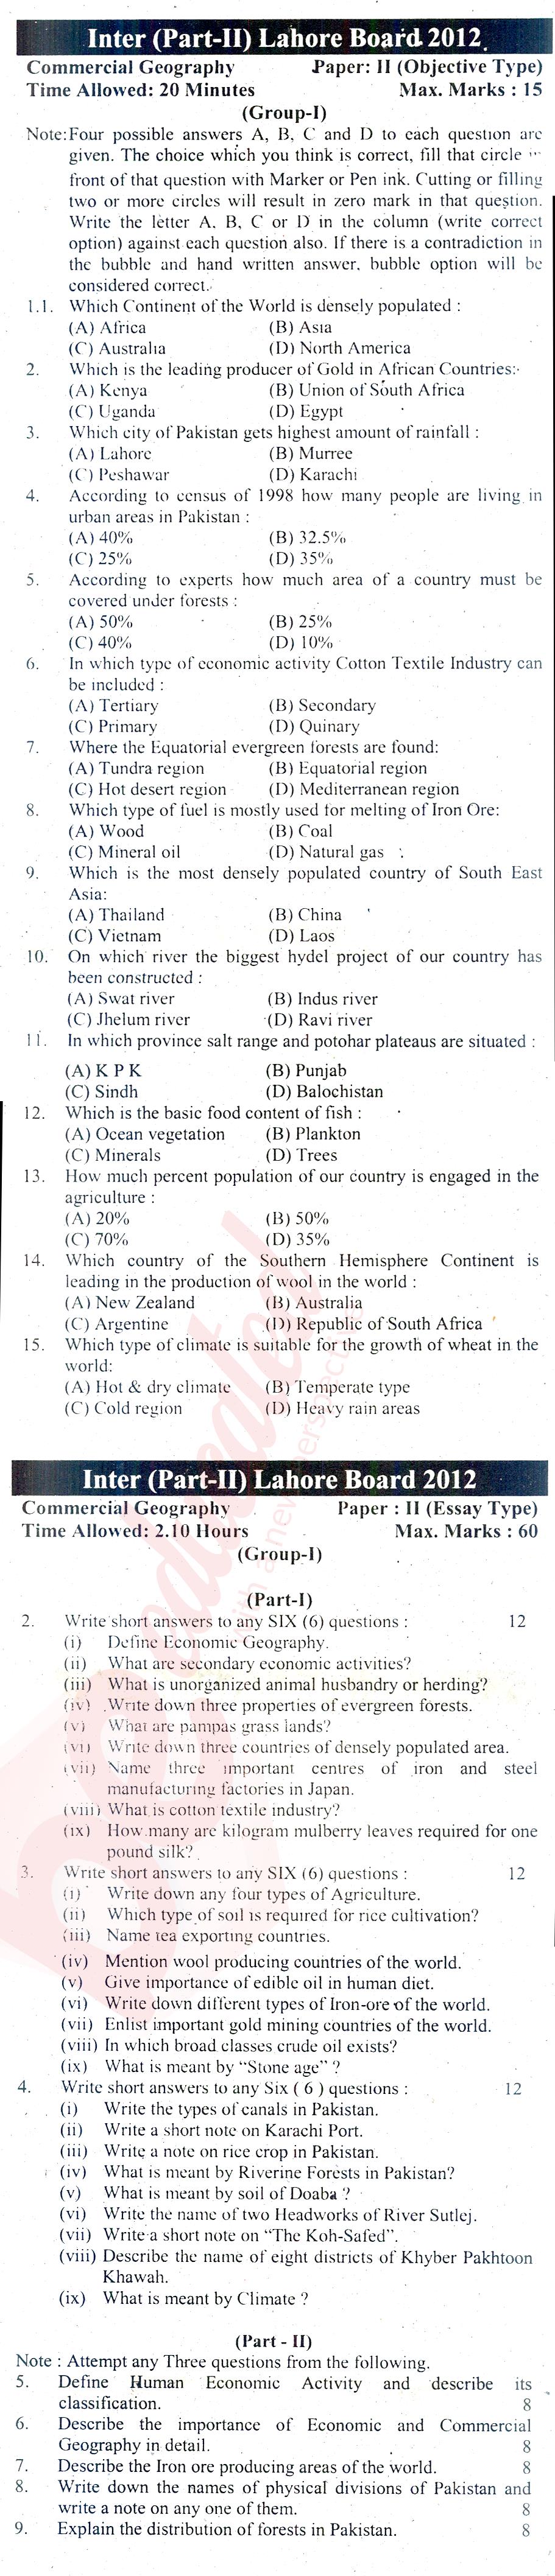 Commercial Geography ICOM Part 2 Past Paper Group 1 BISE Lahore 2012